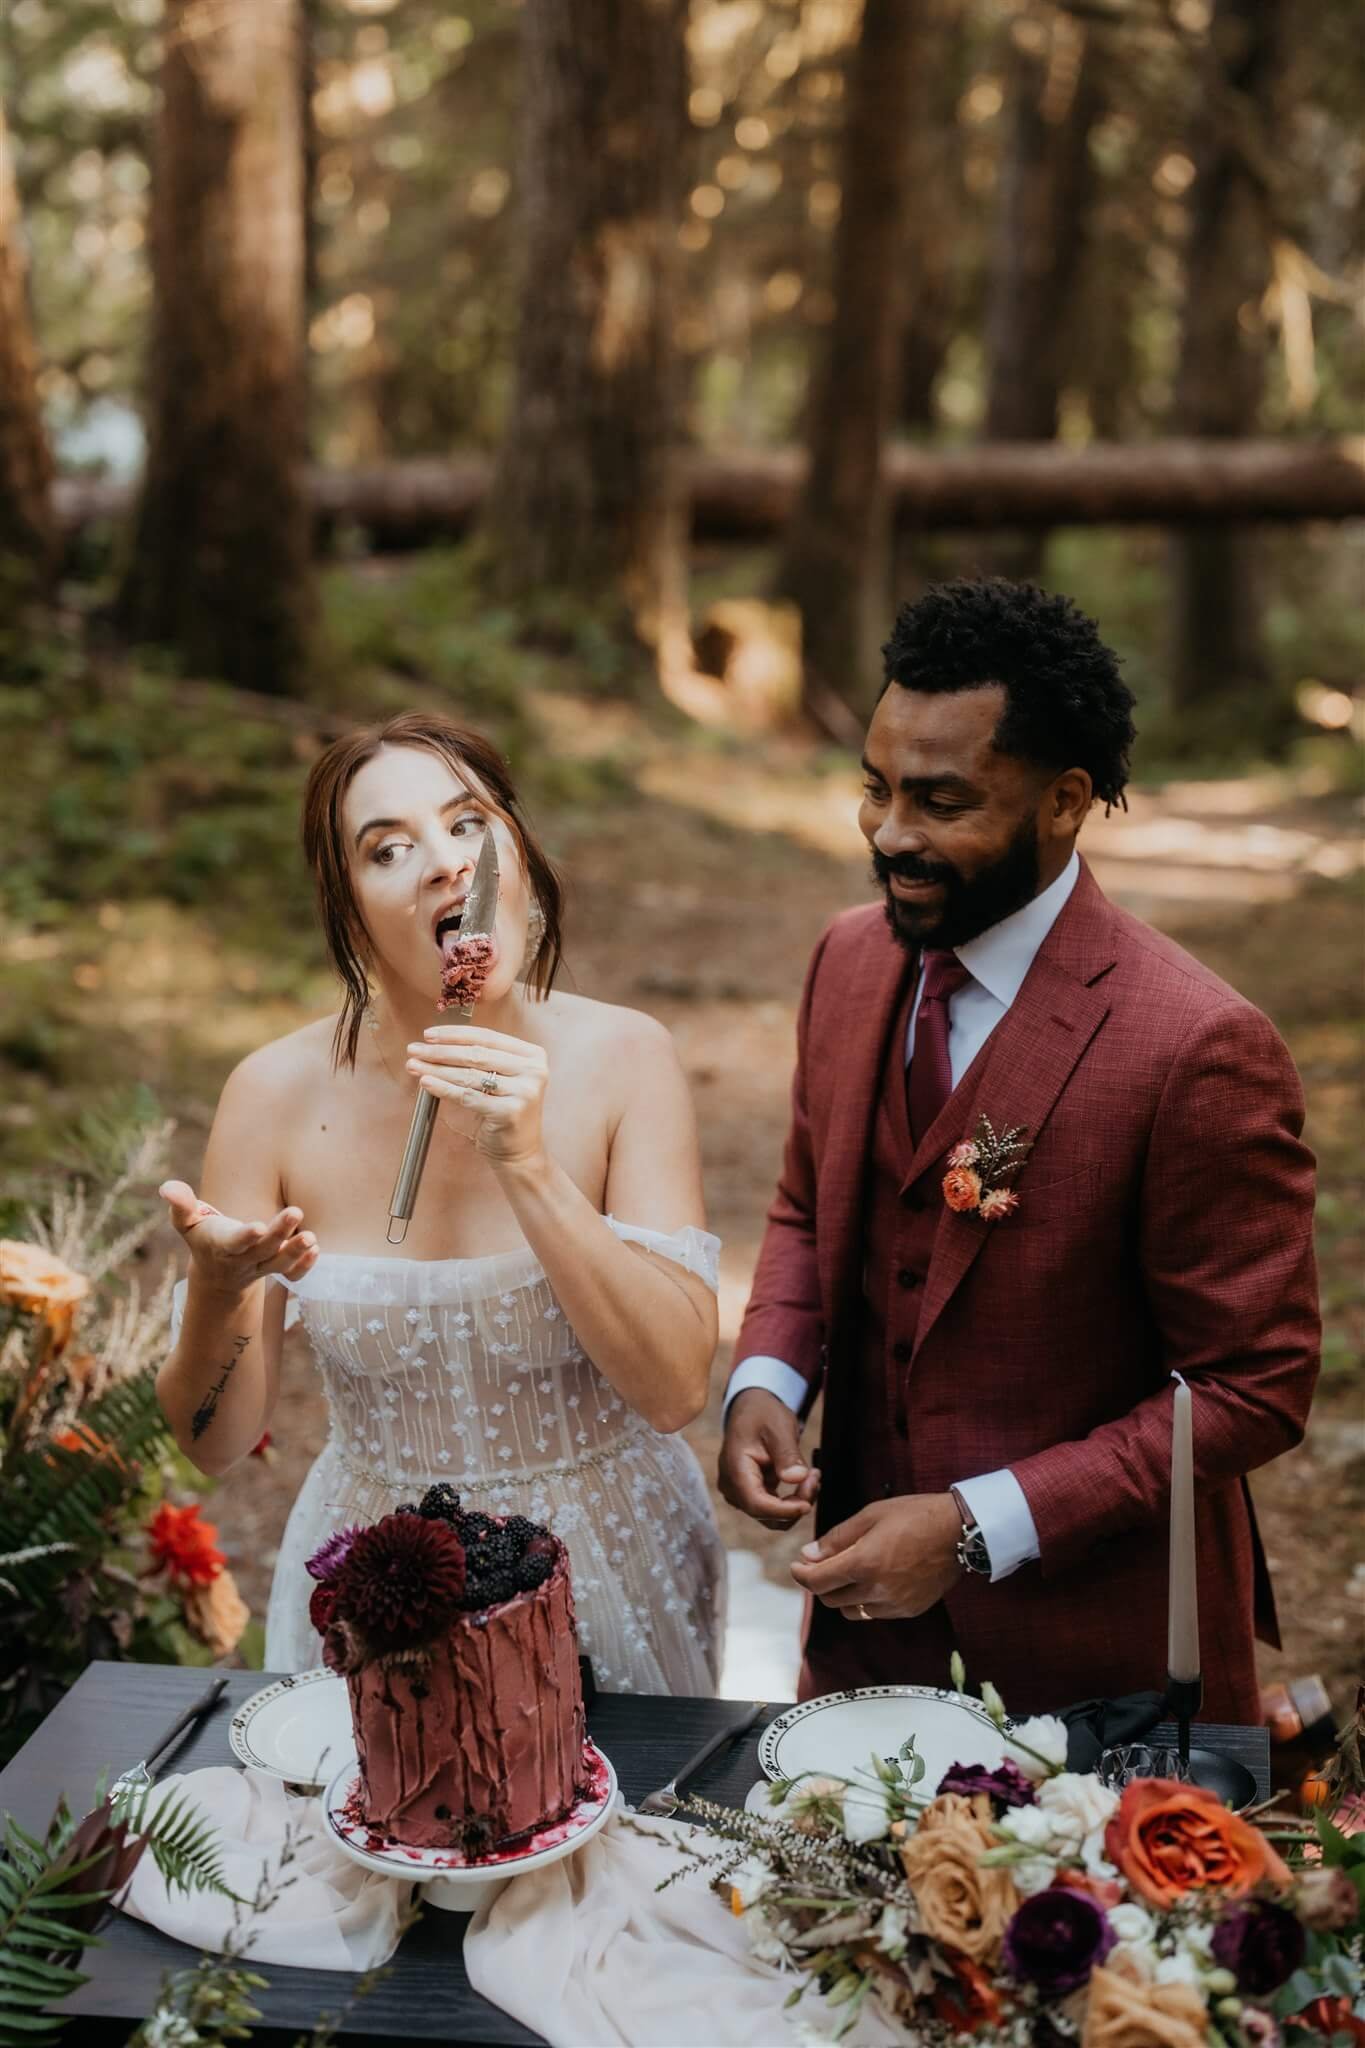 Bride and groom cut cake in the woods after their forest elopement ceremony